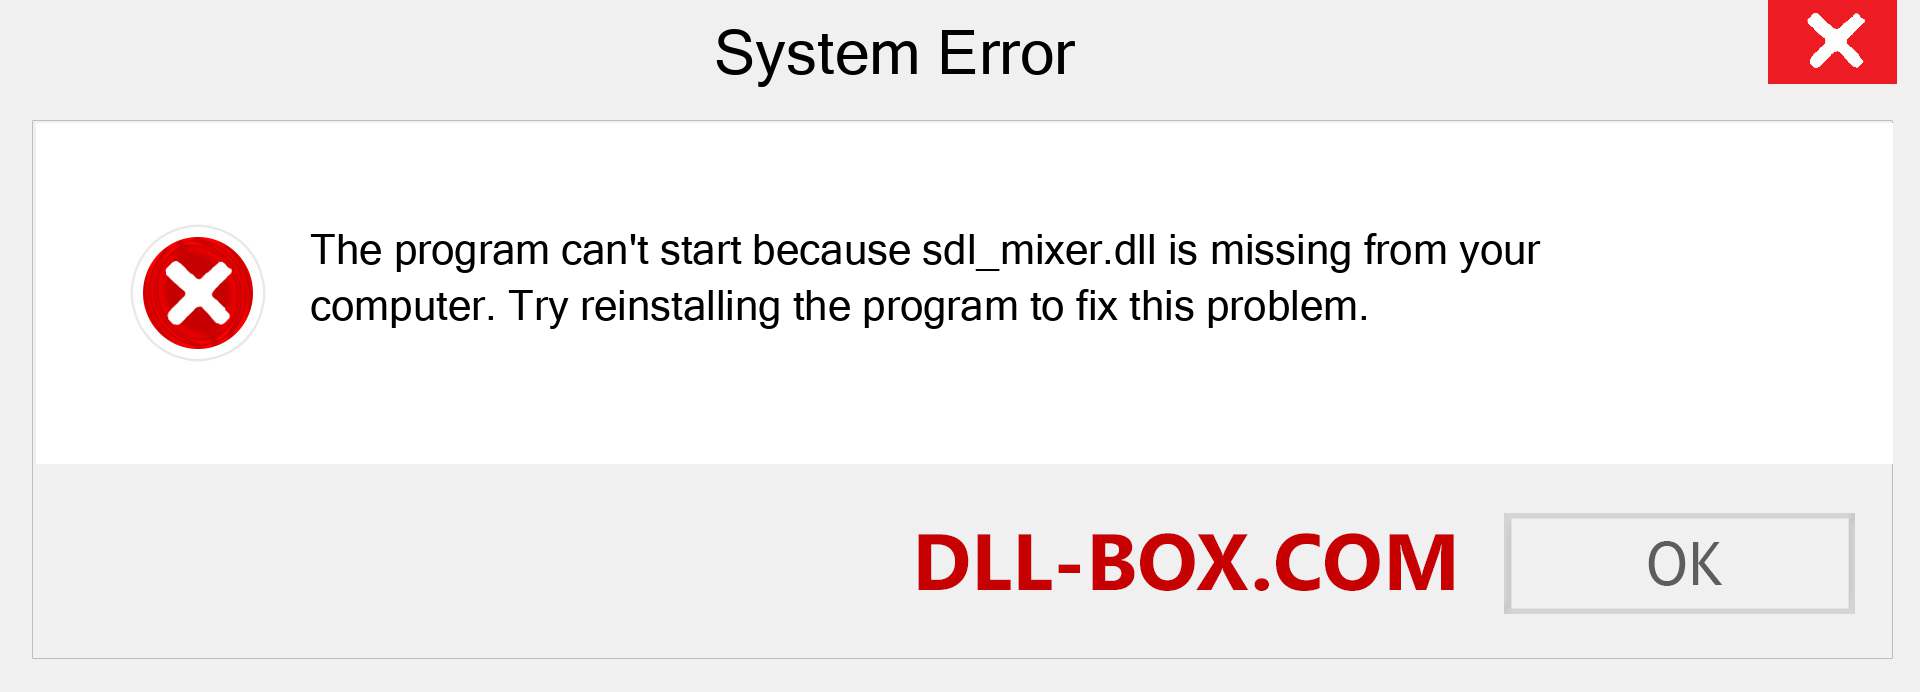  sdl_mixer.dll file is missing?. Download for Windows 7, 8, 10 - Fix  sdl_mixer dll Missing Error on Windows, photos, images